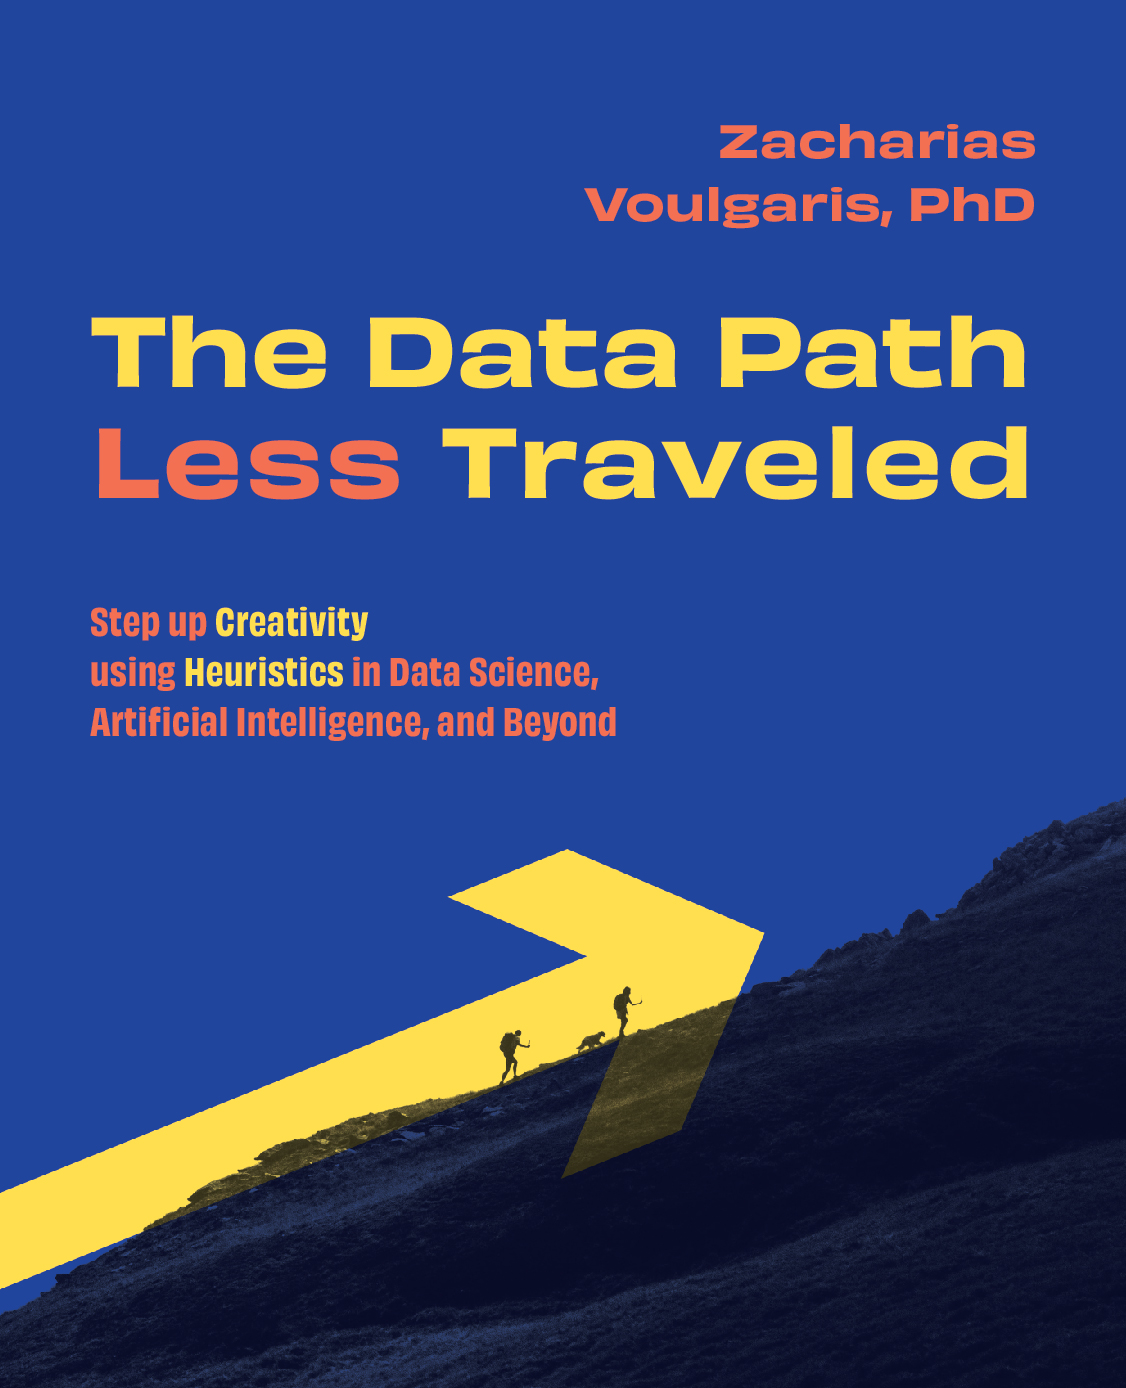 Zacharias
Voulgaris, PhD

The Data Path
Less Traveled

Step up Creativity
using Heuristics in Data Science,
Artificial Intelligence, and Beyond